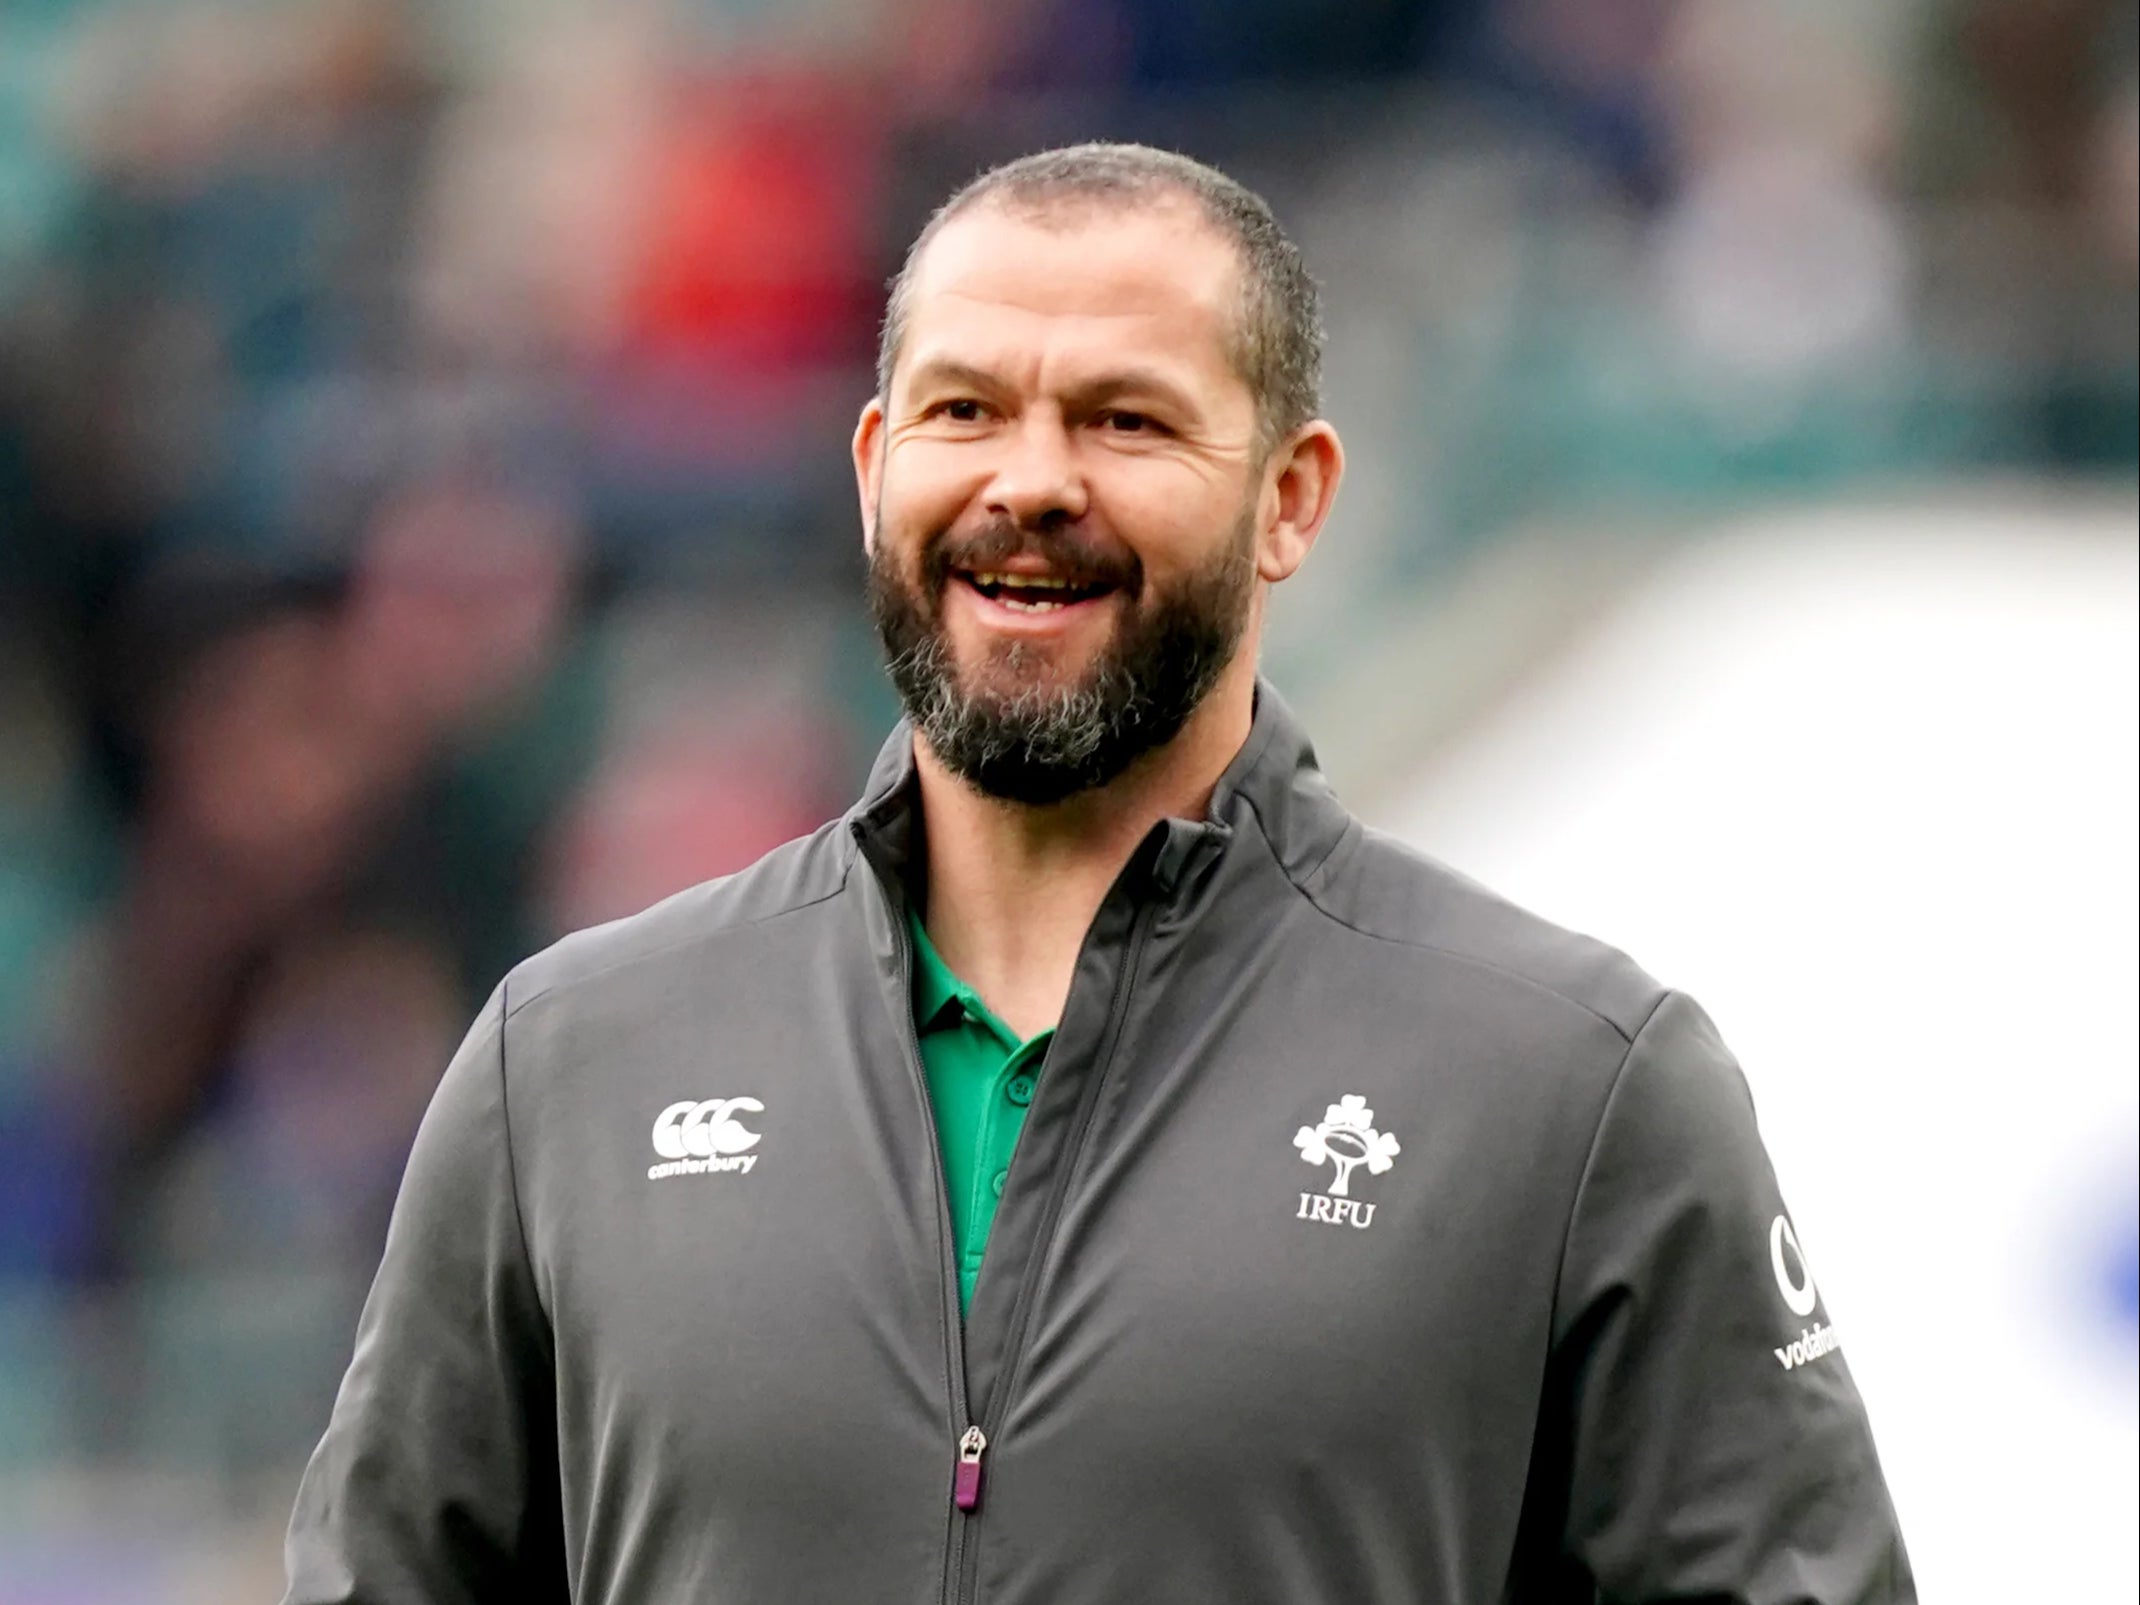 Andy Farrell, pictured, has signed a new two-year contract extension with Ireland